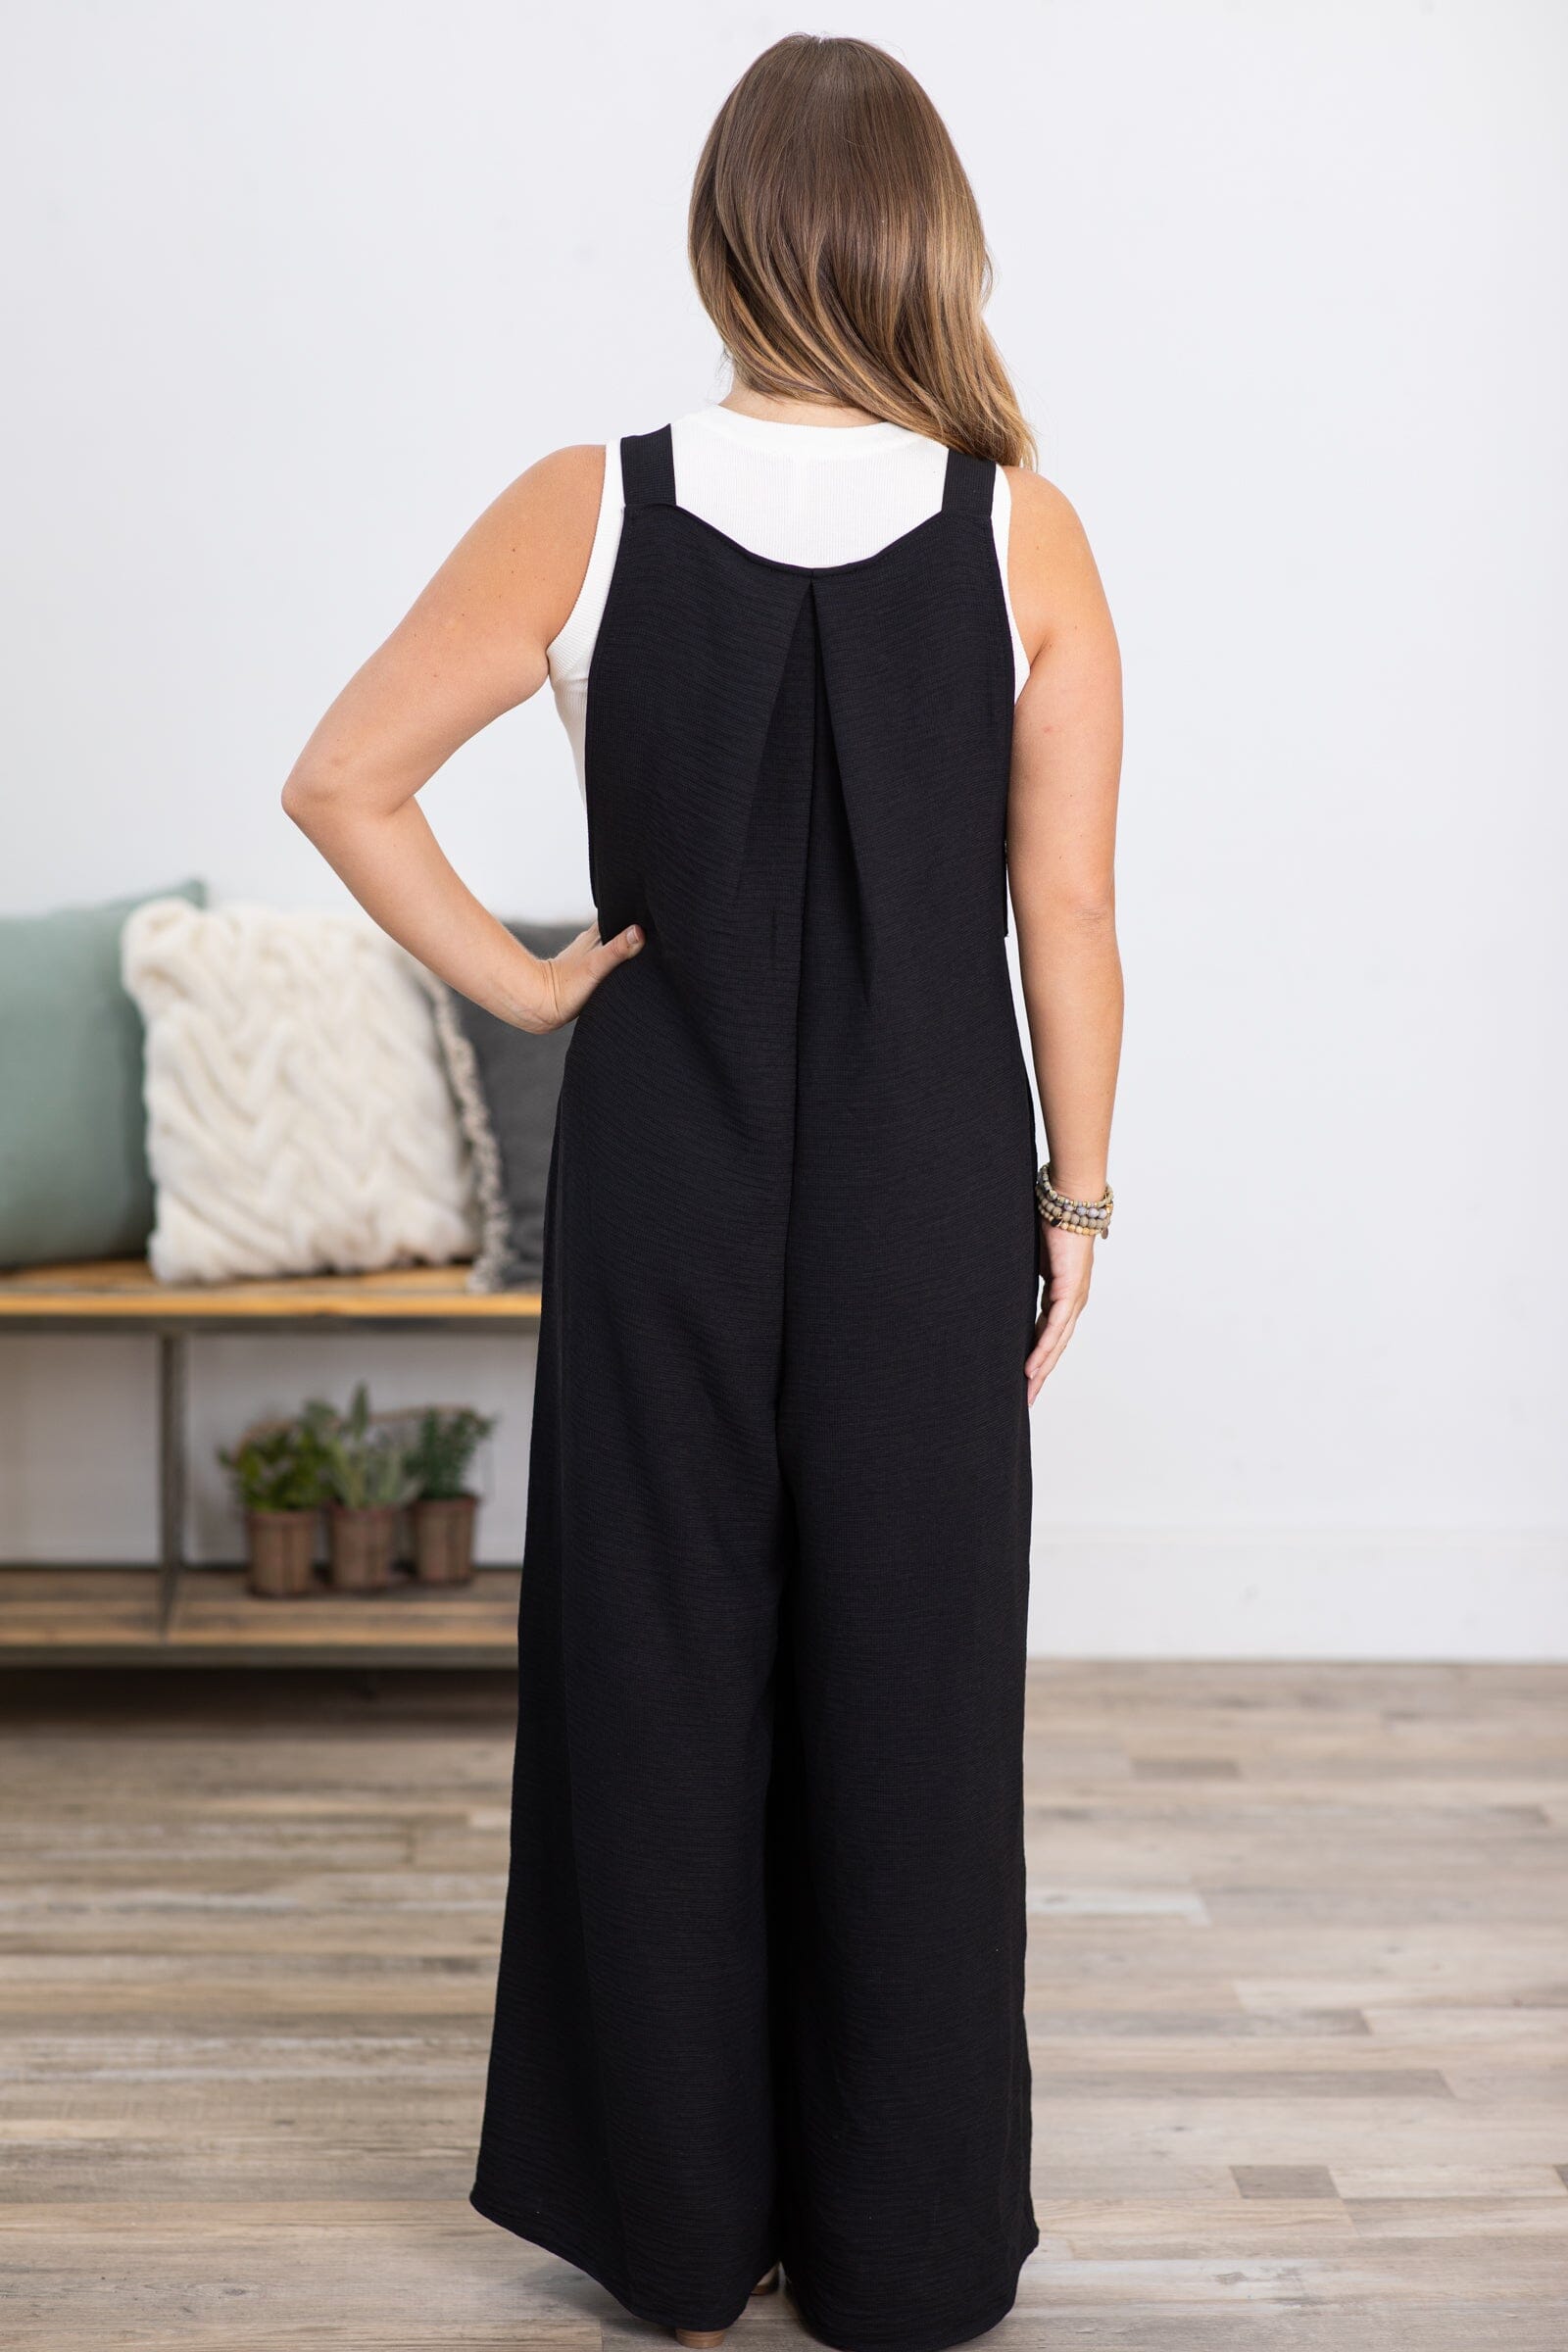 Black Wide Leg Overalls - Filly Flair